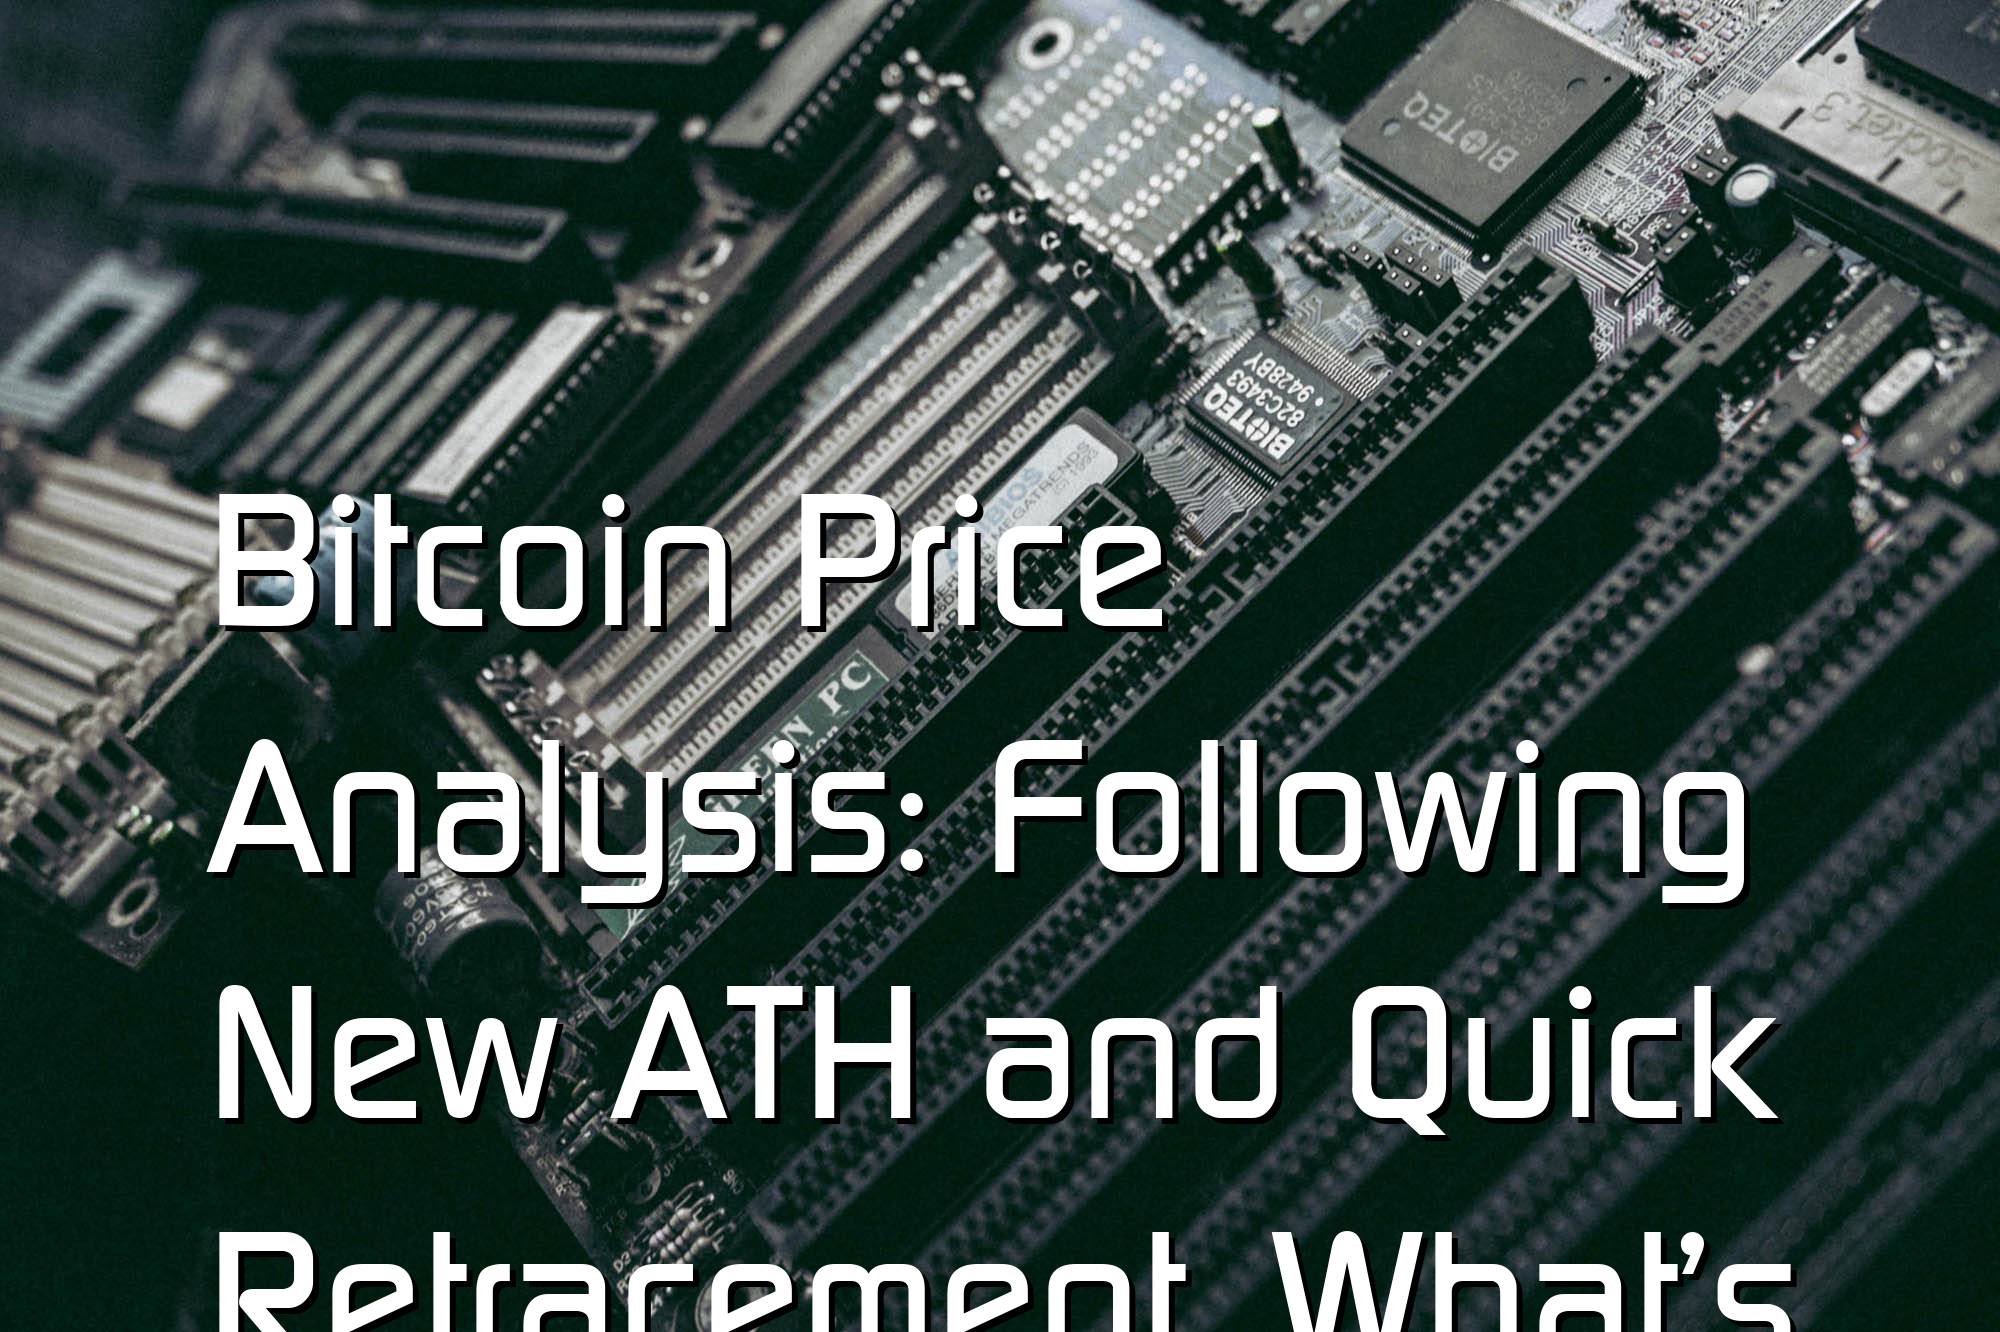 @$60166: Bitcoin Price Analysis: Following New ATH and Quick Retracement, What’s Next for BTC?